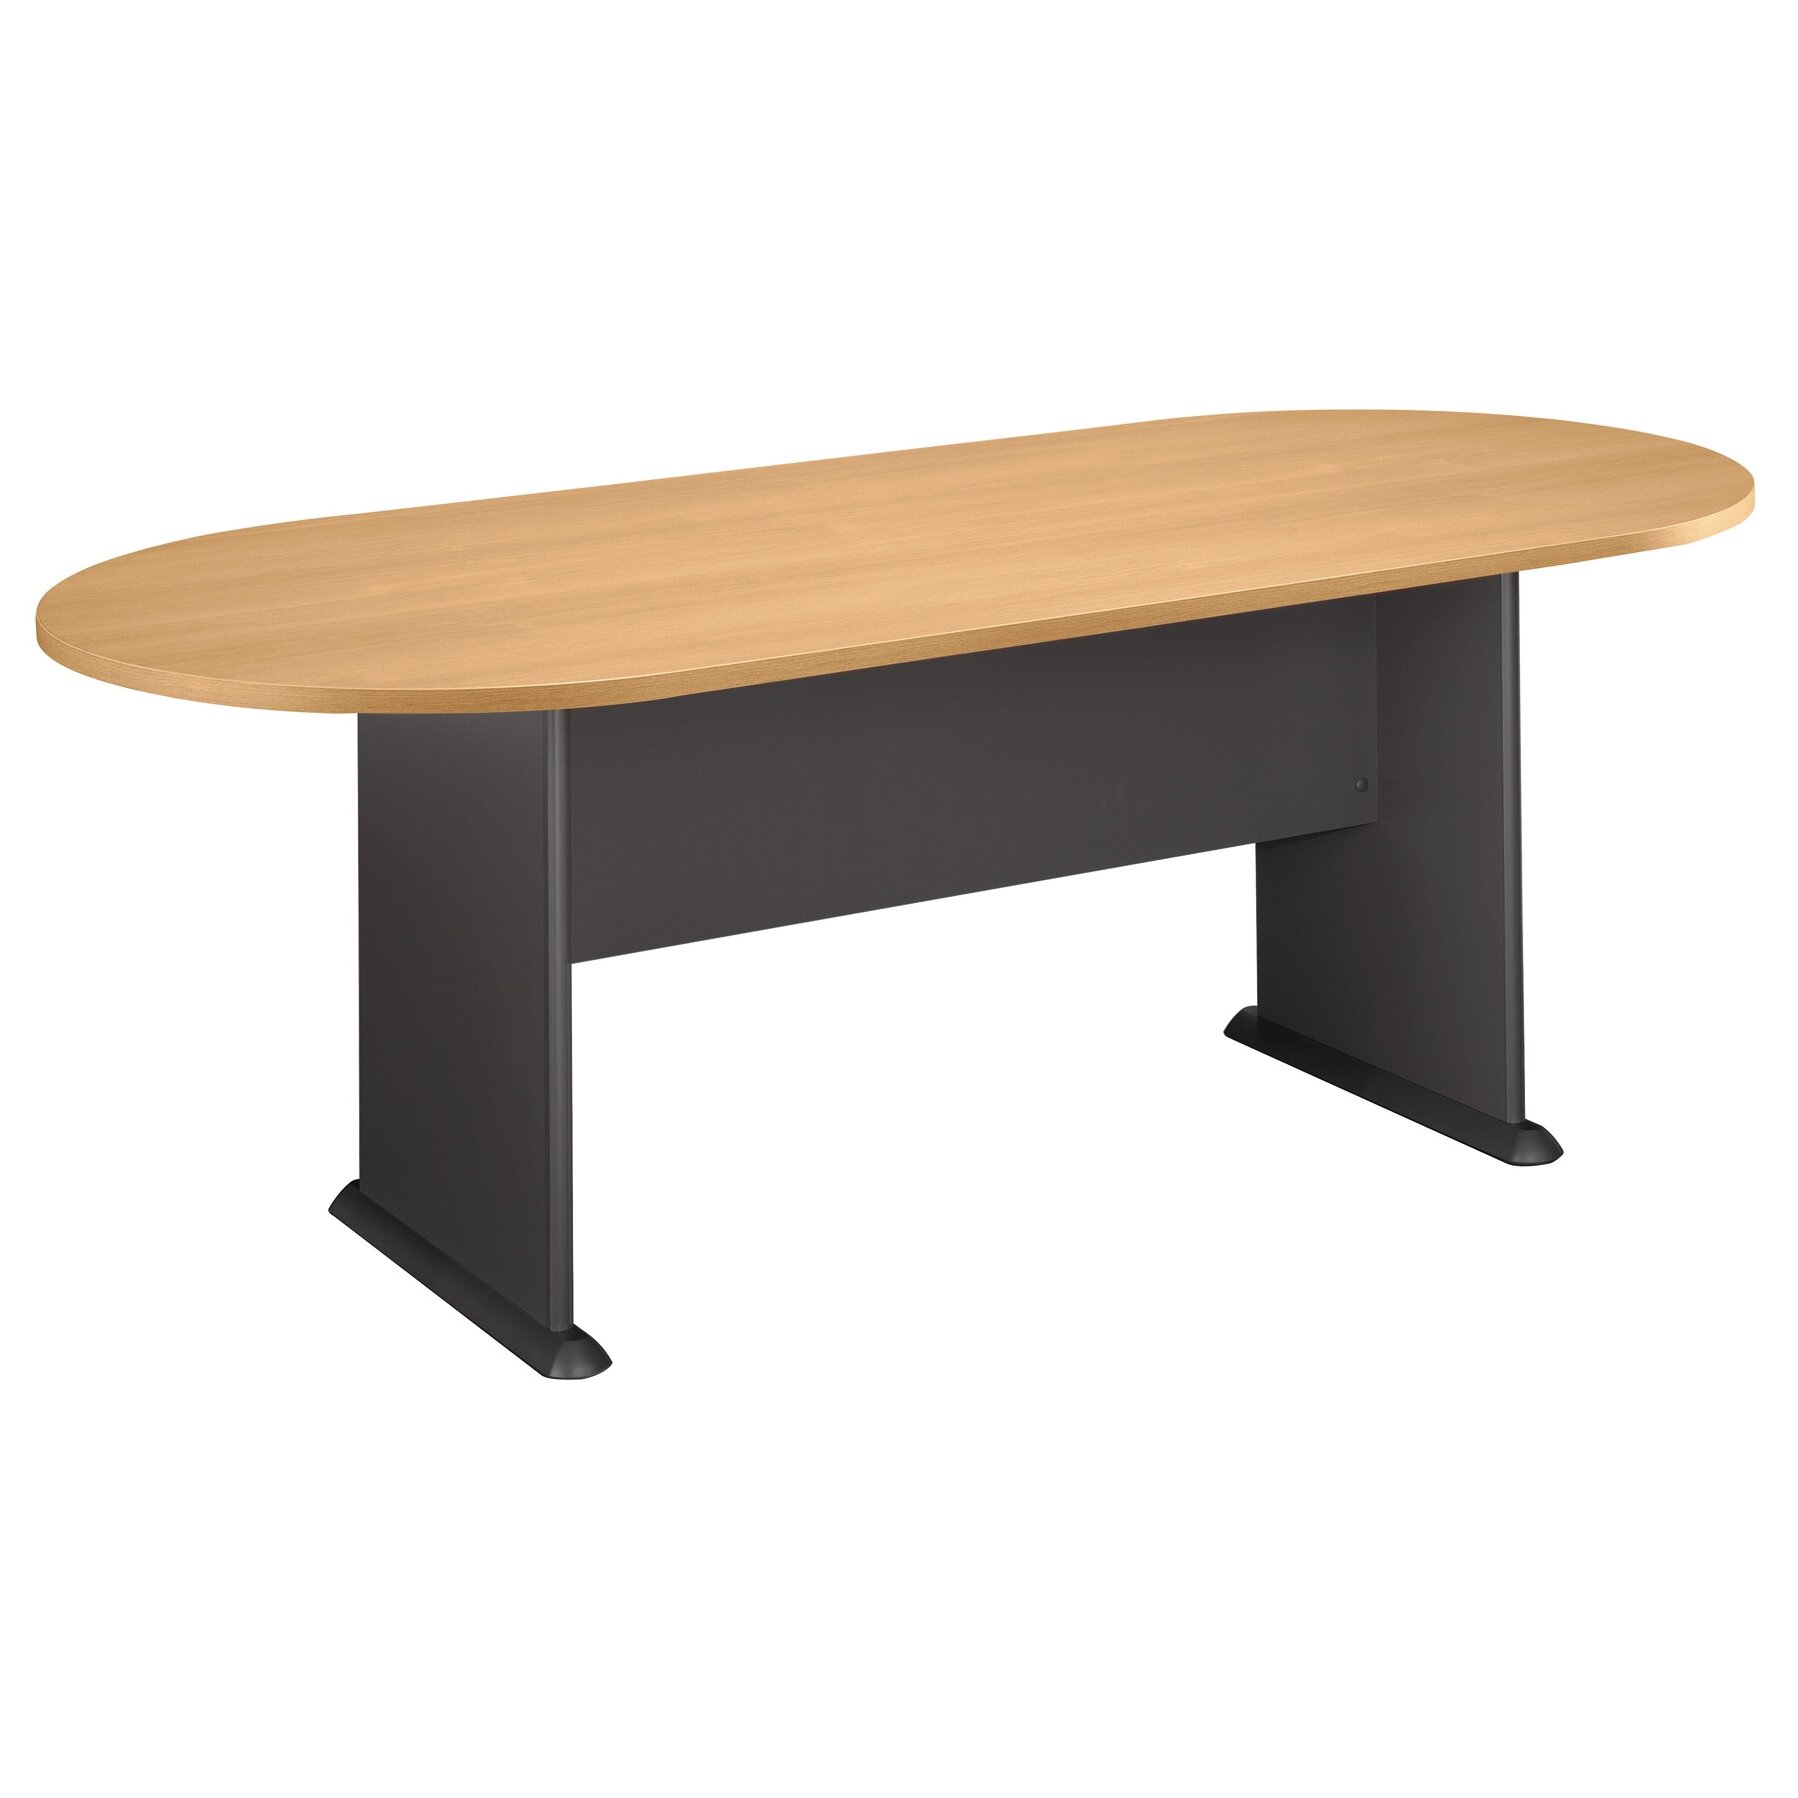 8 conference table